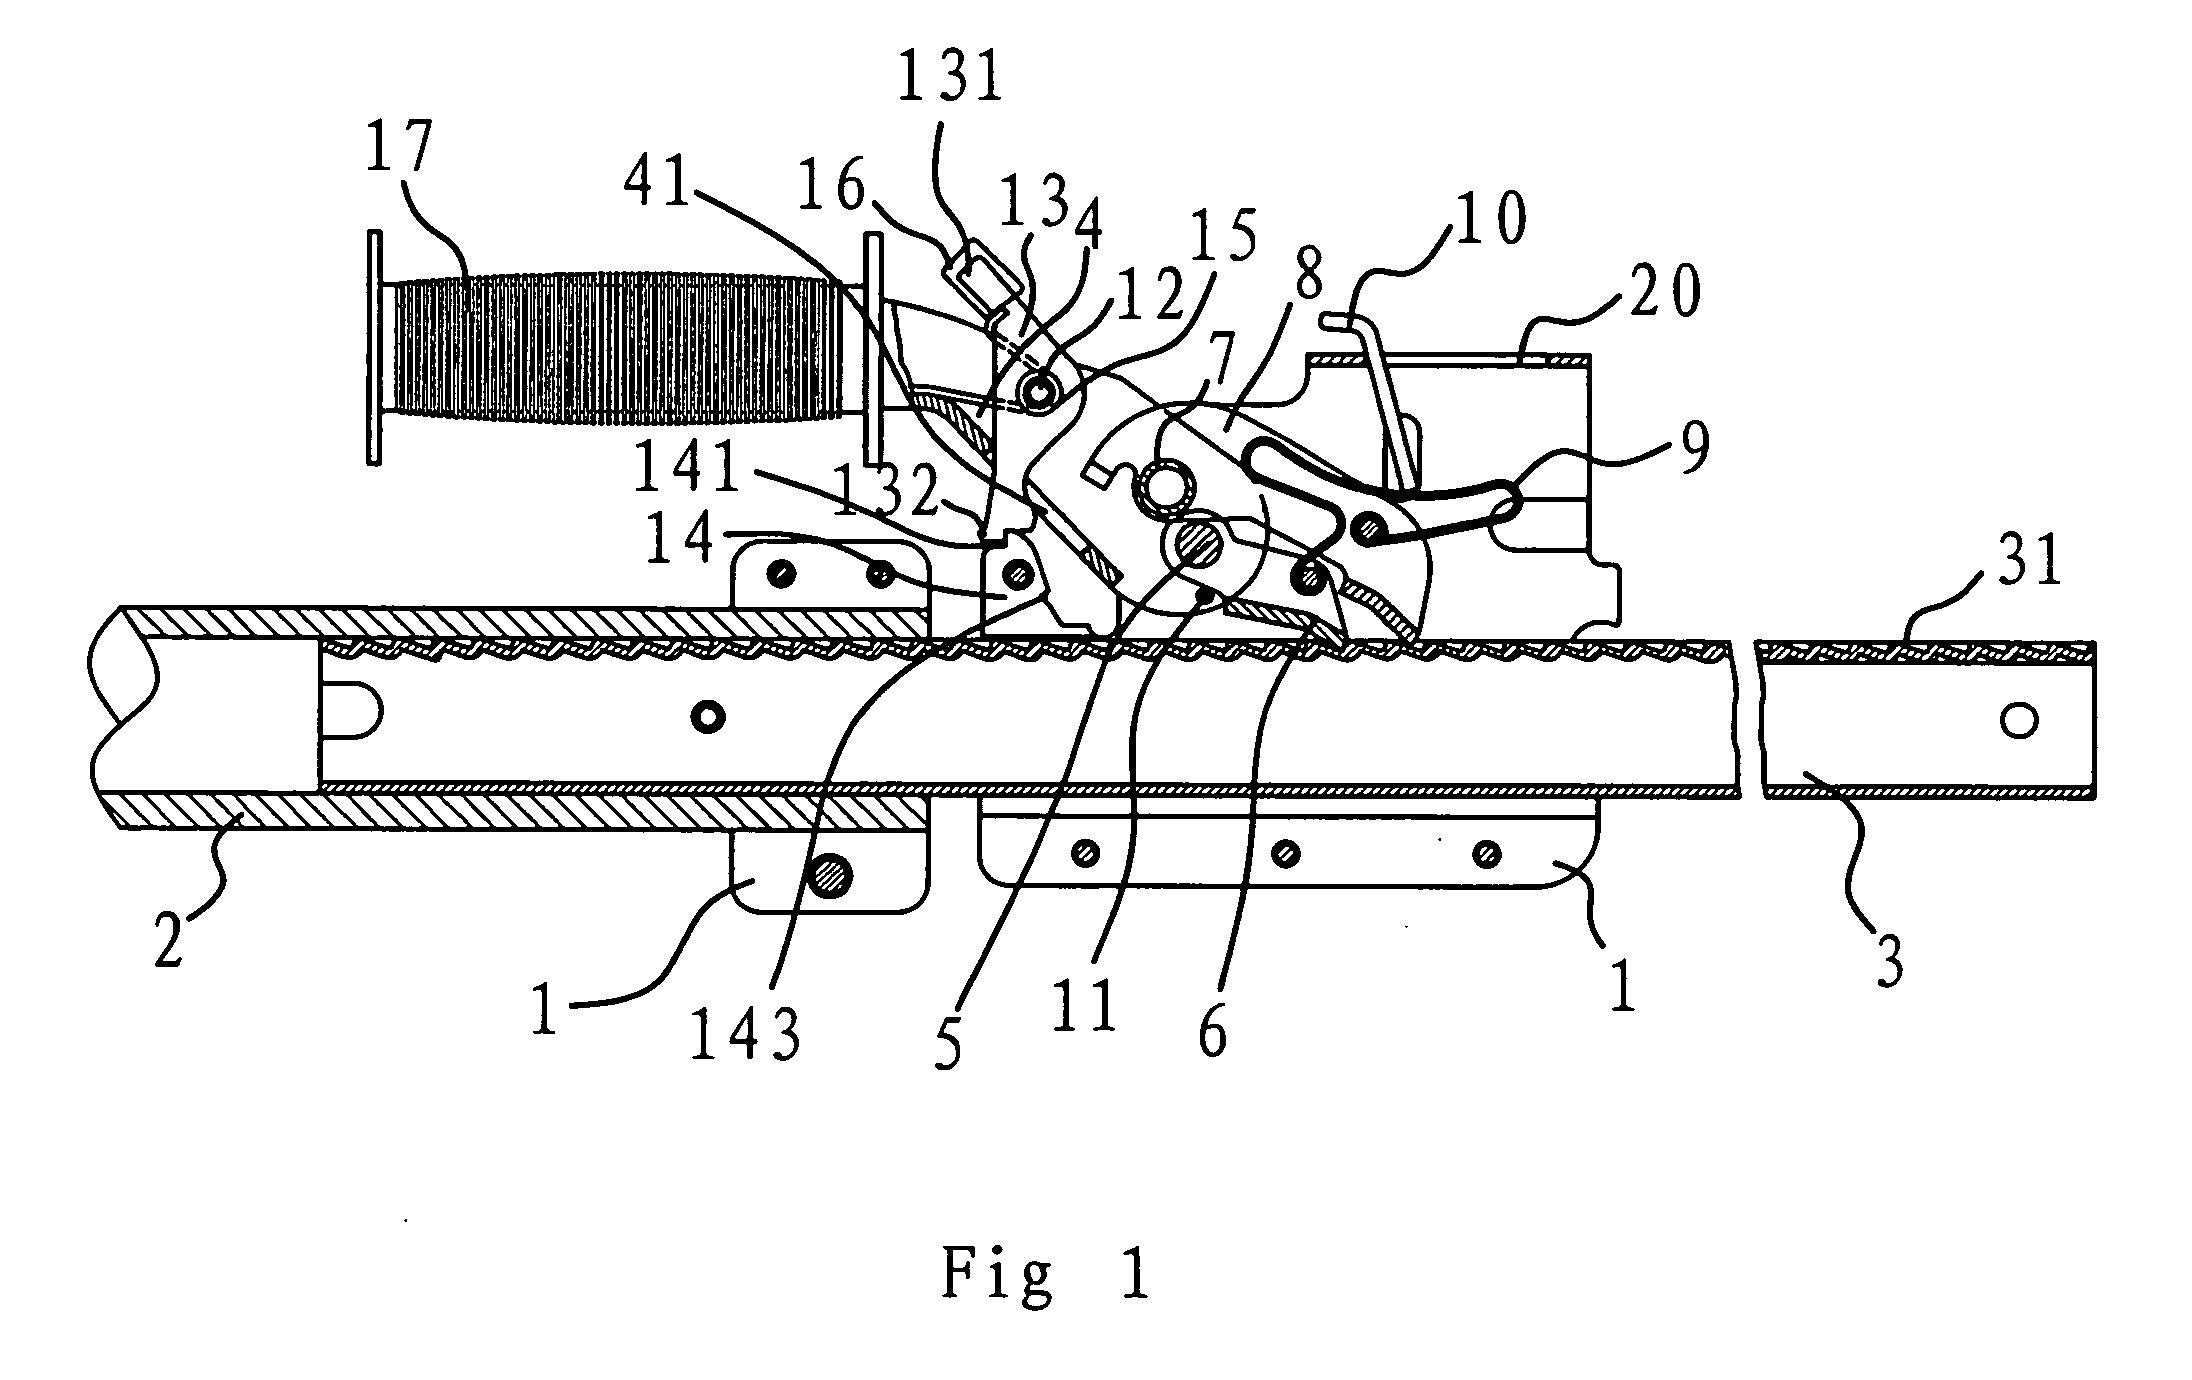 Goods fastening apparatus with improved structures